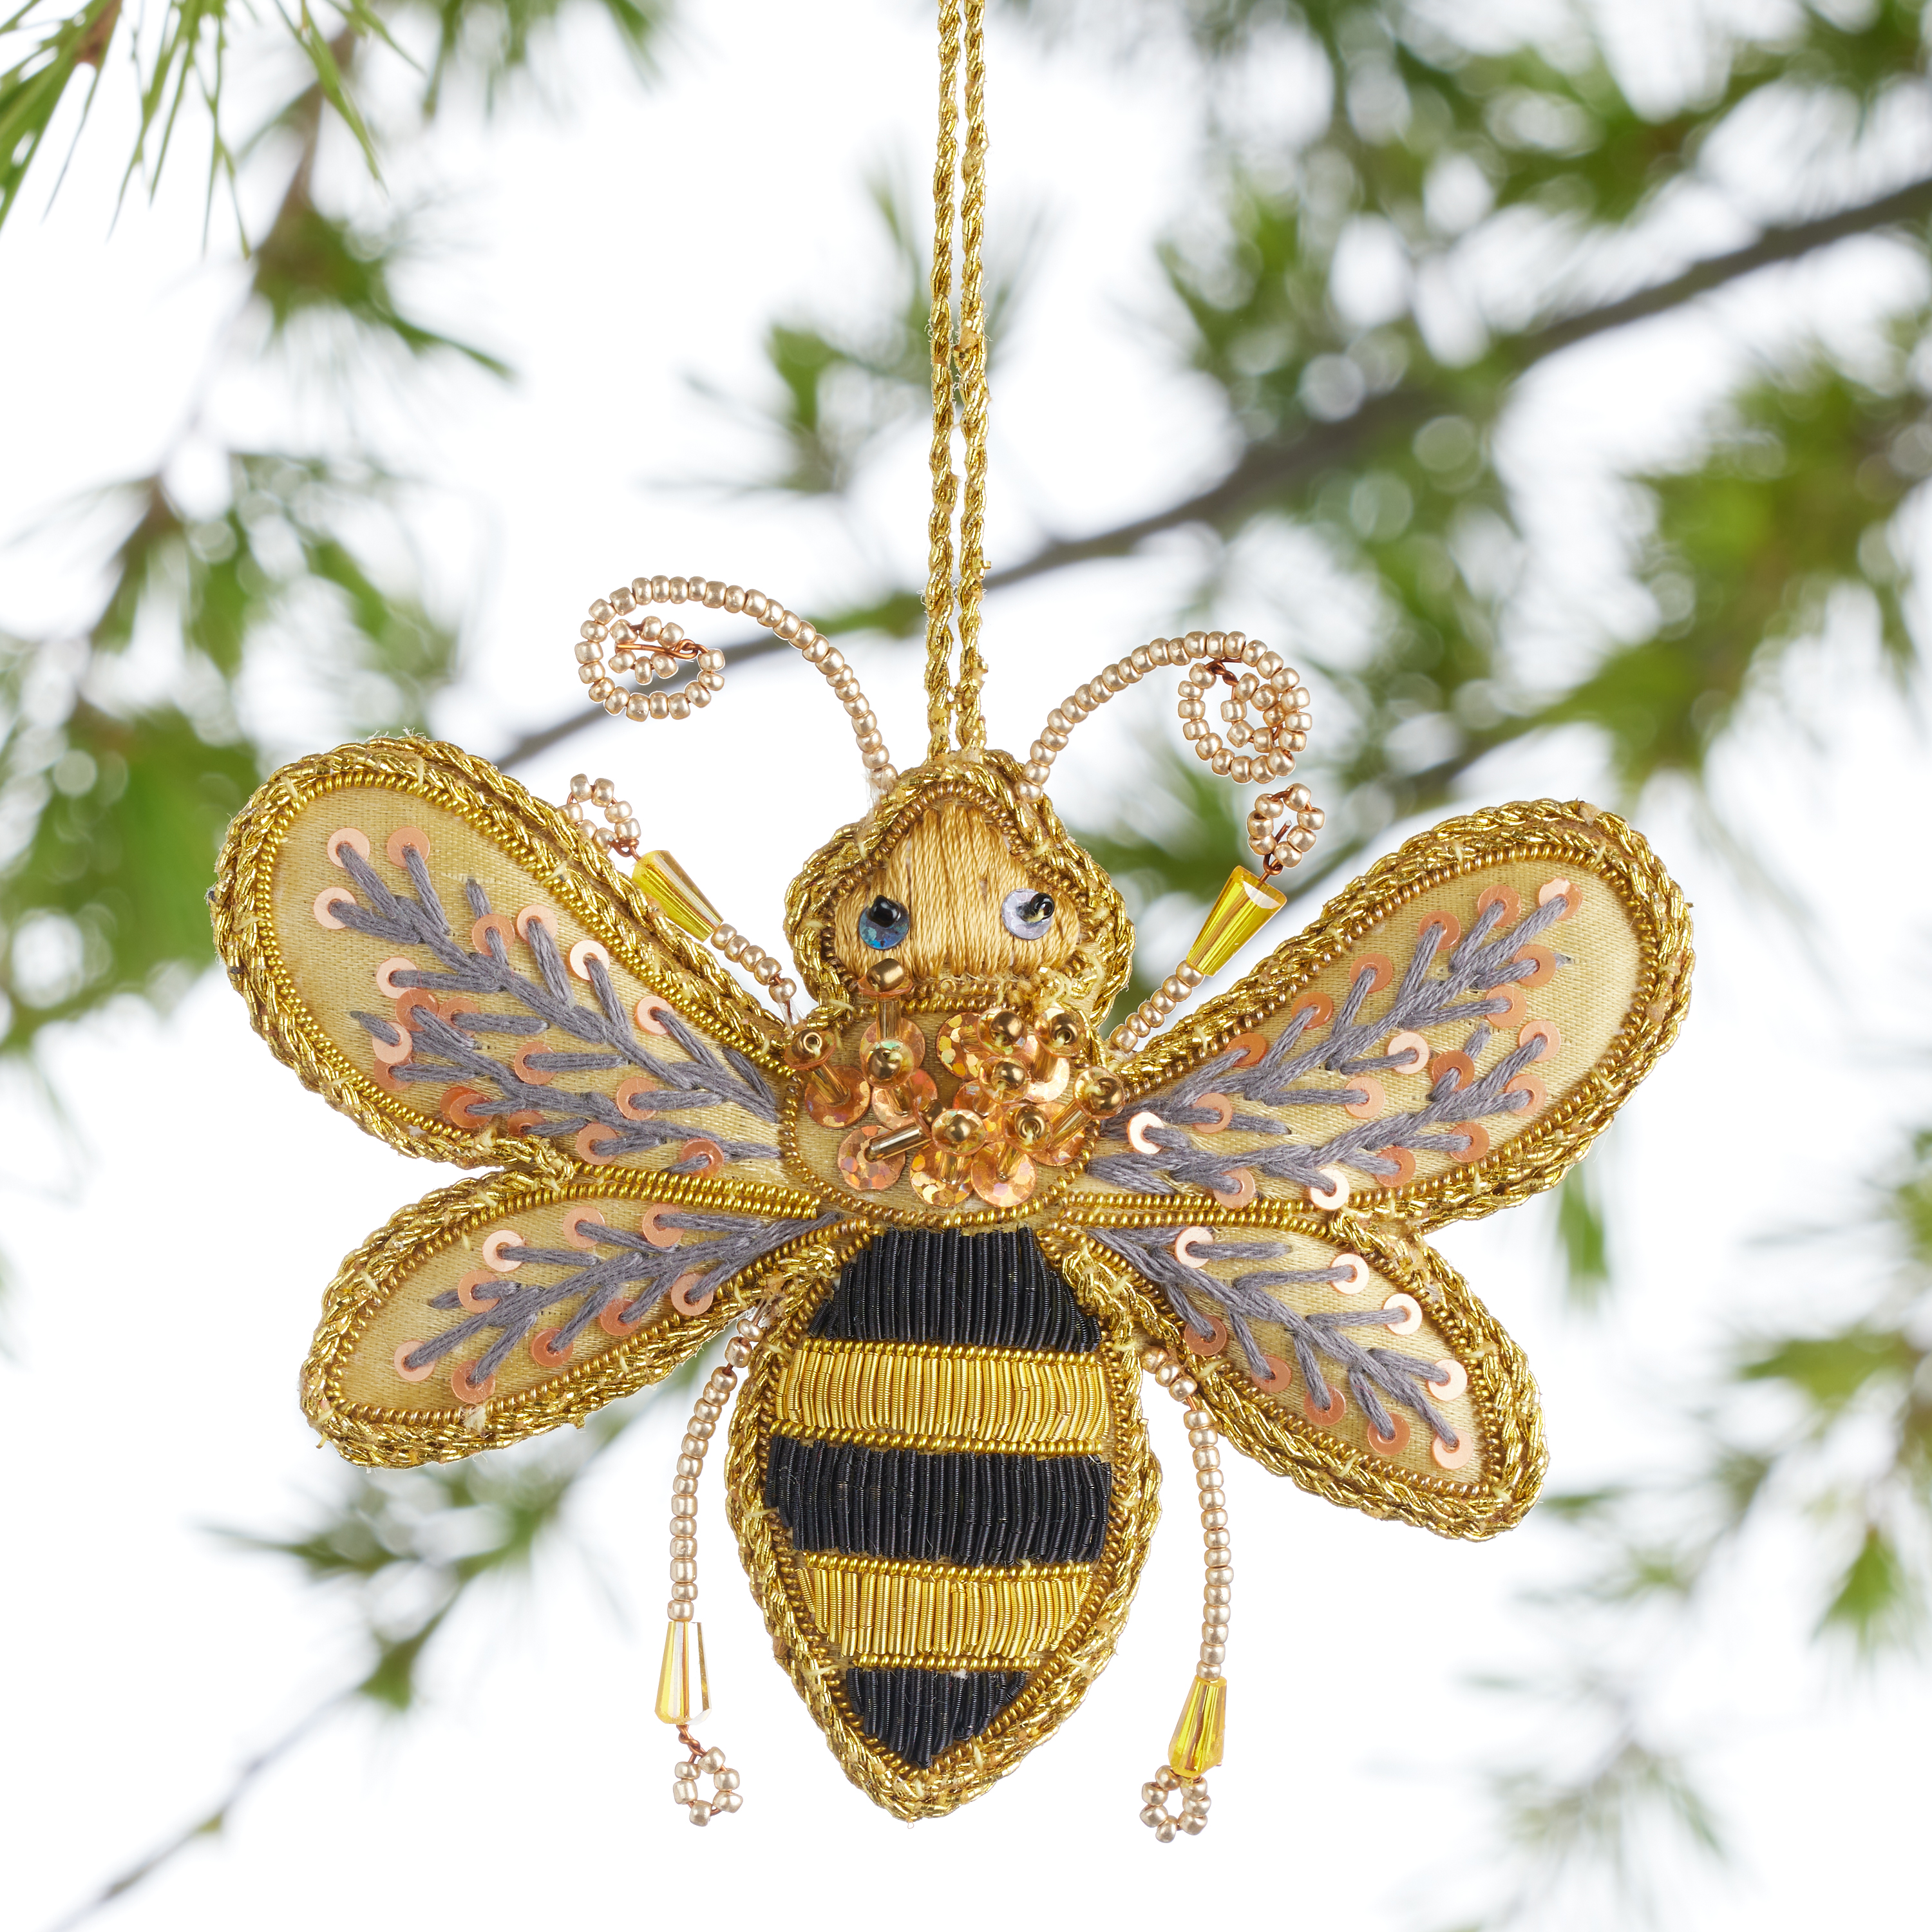 Embroidered Satin Bee Ornament - World Market